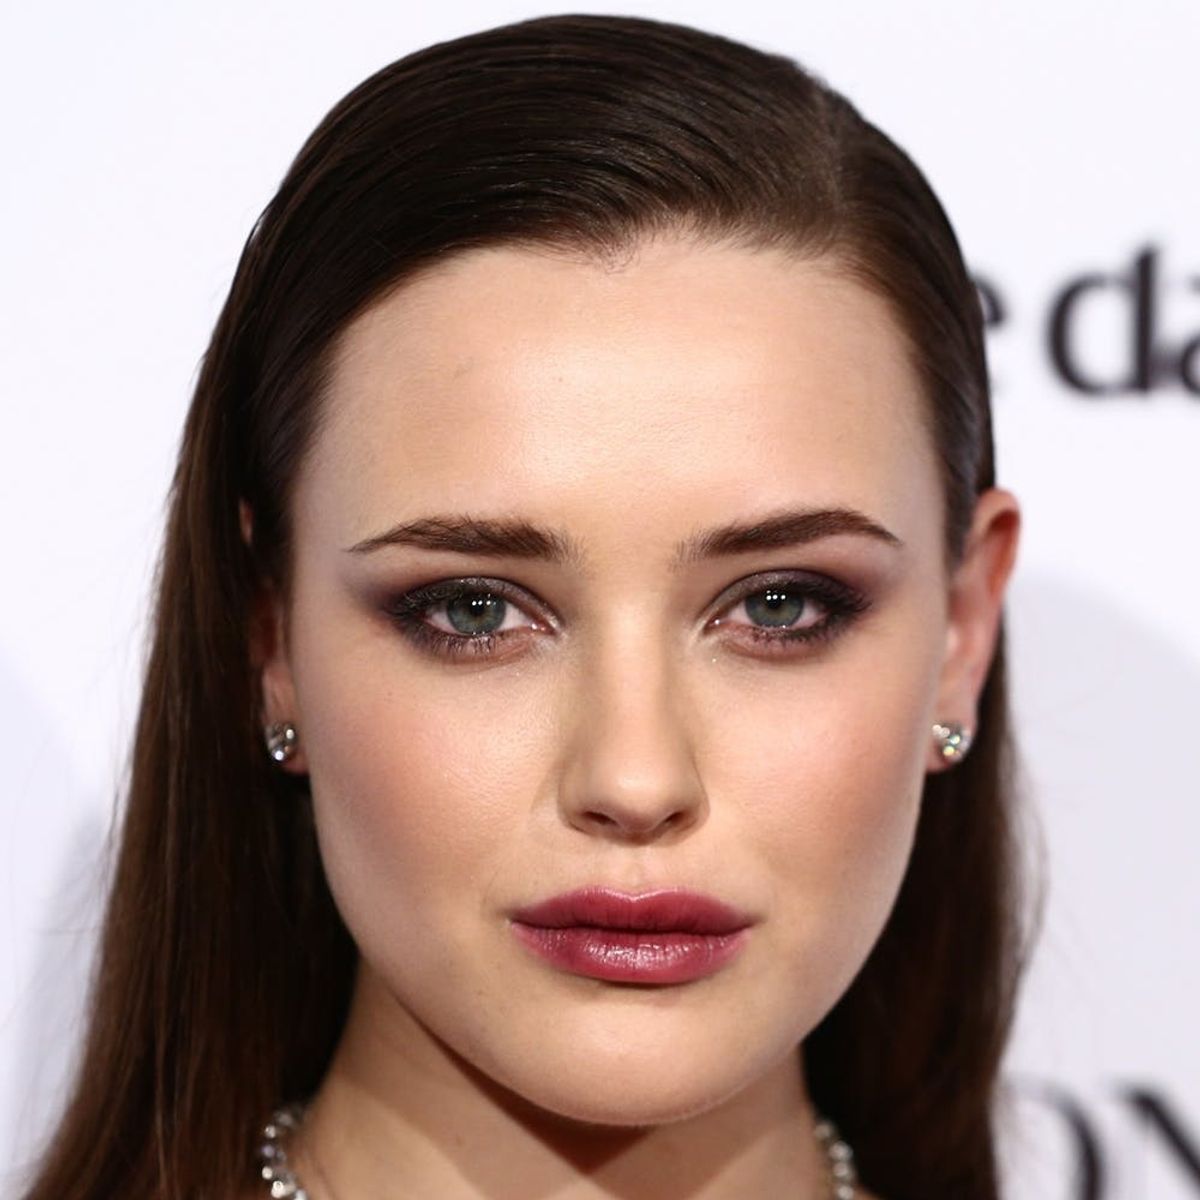 You Won’t Recognize ’13 Reasons Why’ Star Katherine Langford in Her New Movie Role